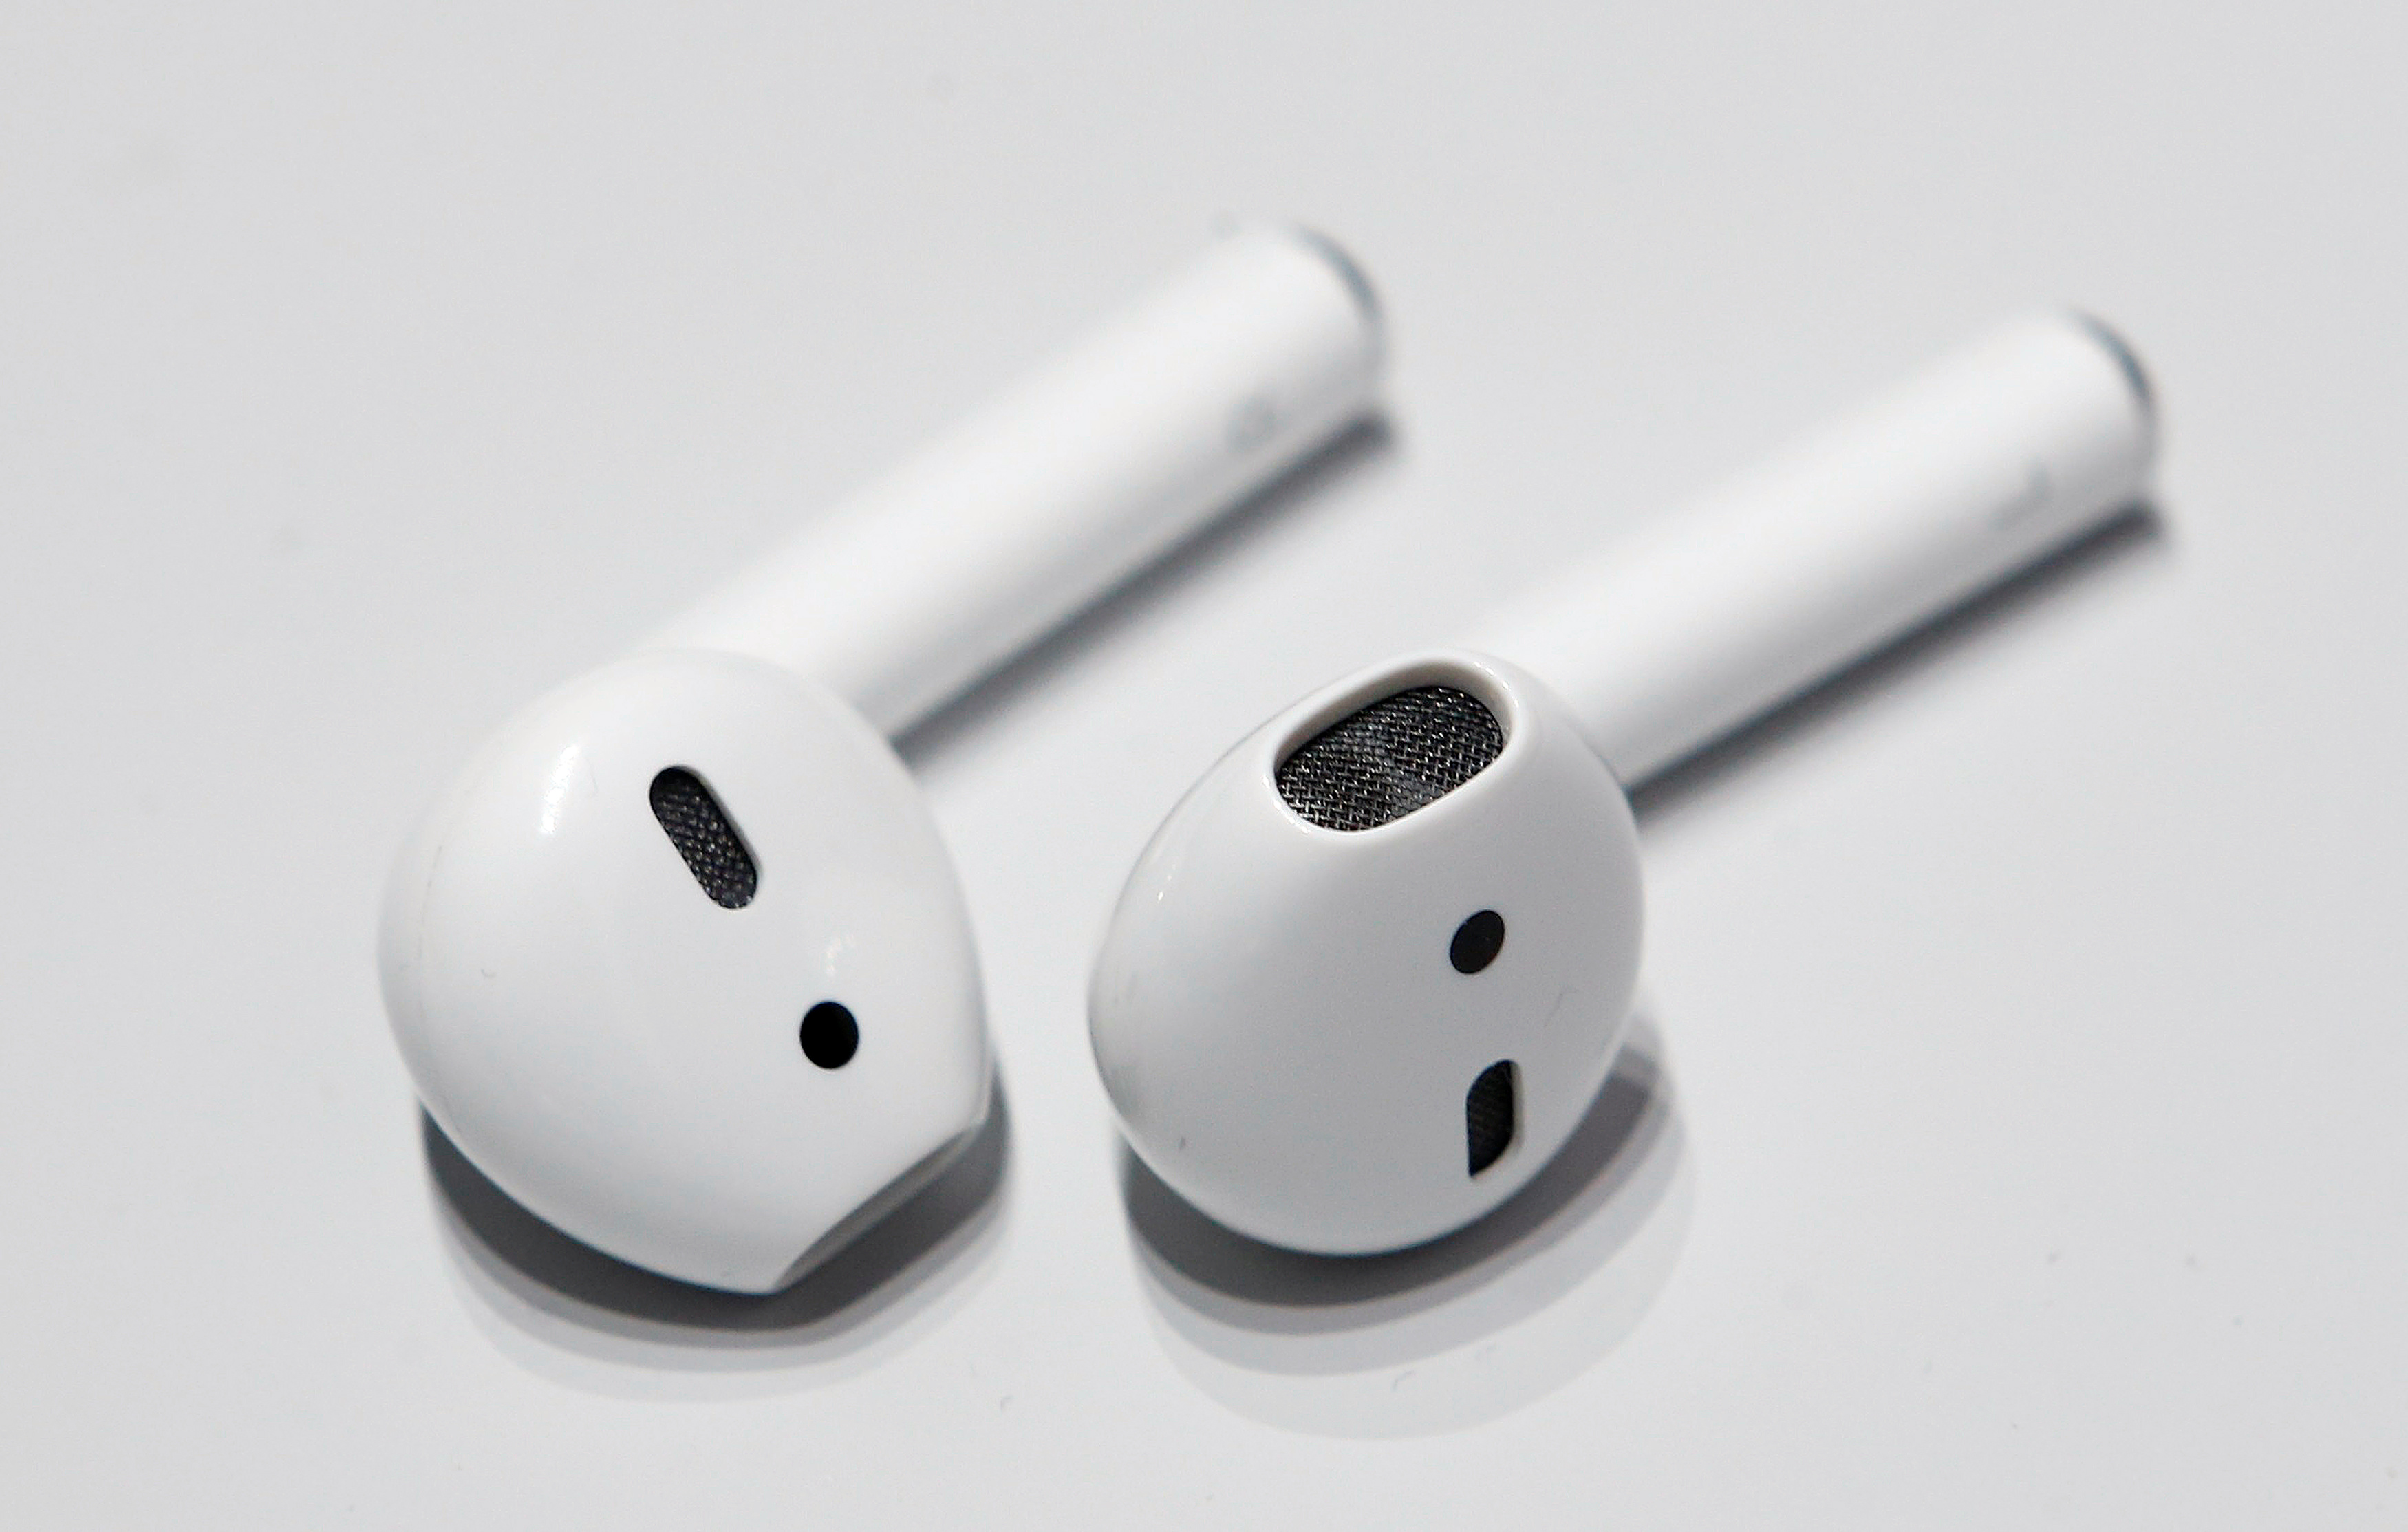 Apple AirPods are displayed during a media event in San Francisco